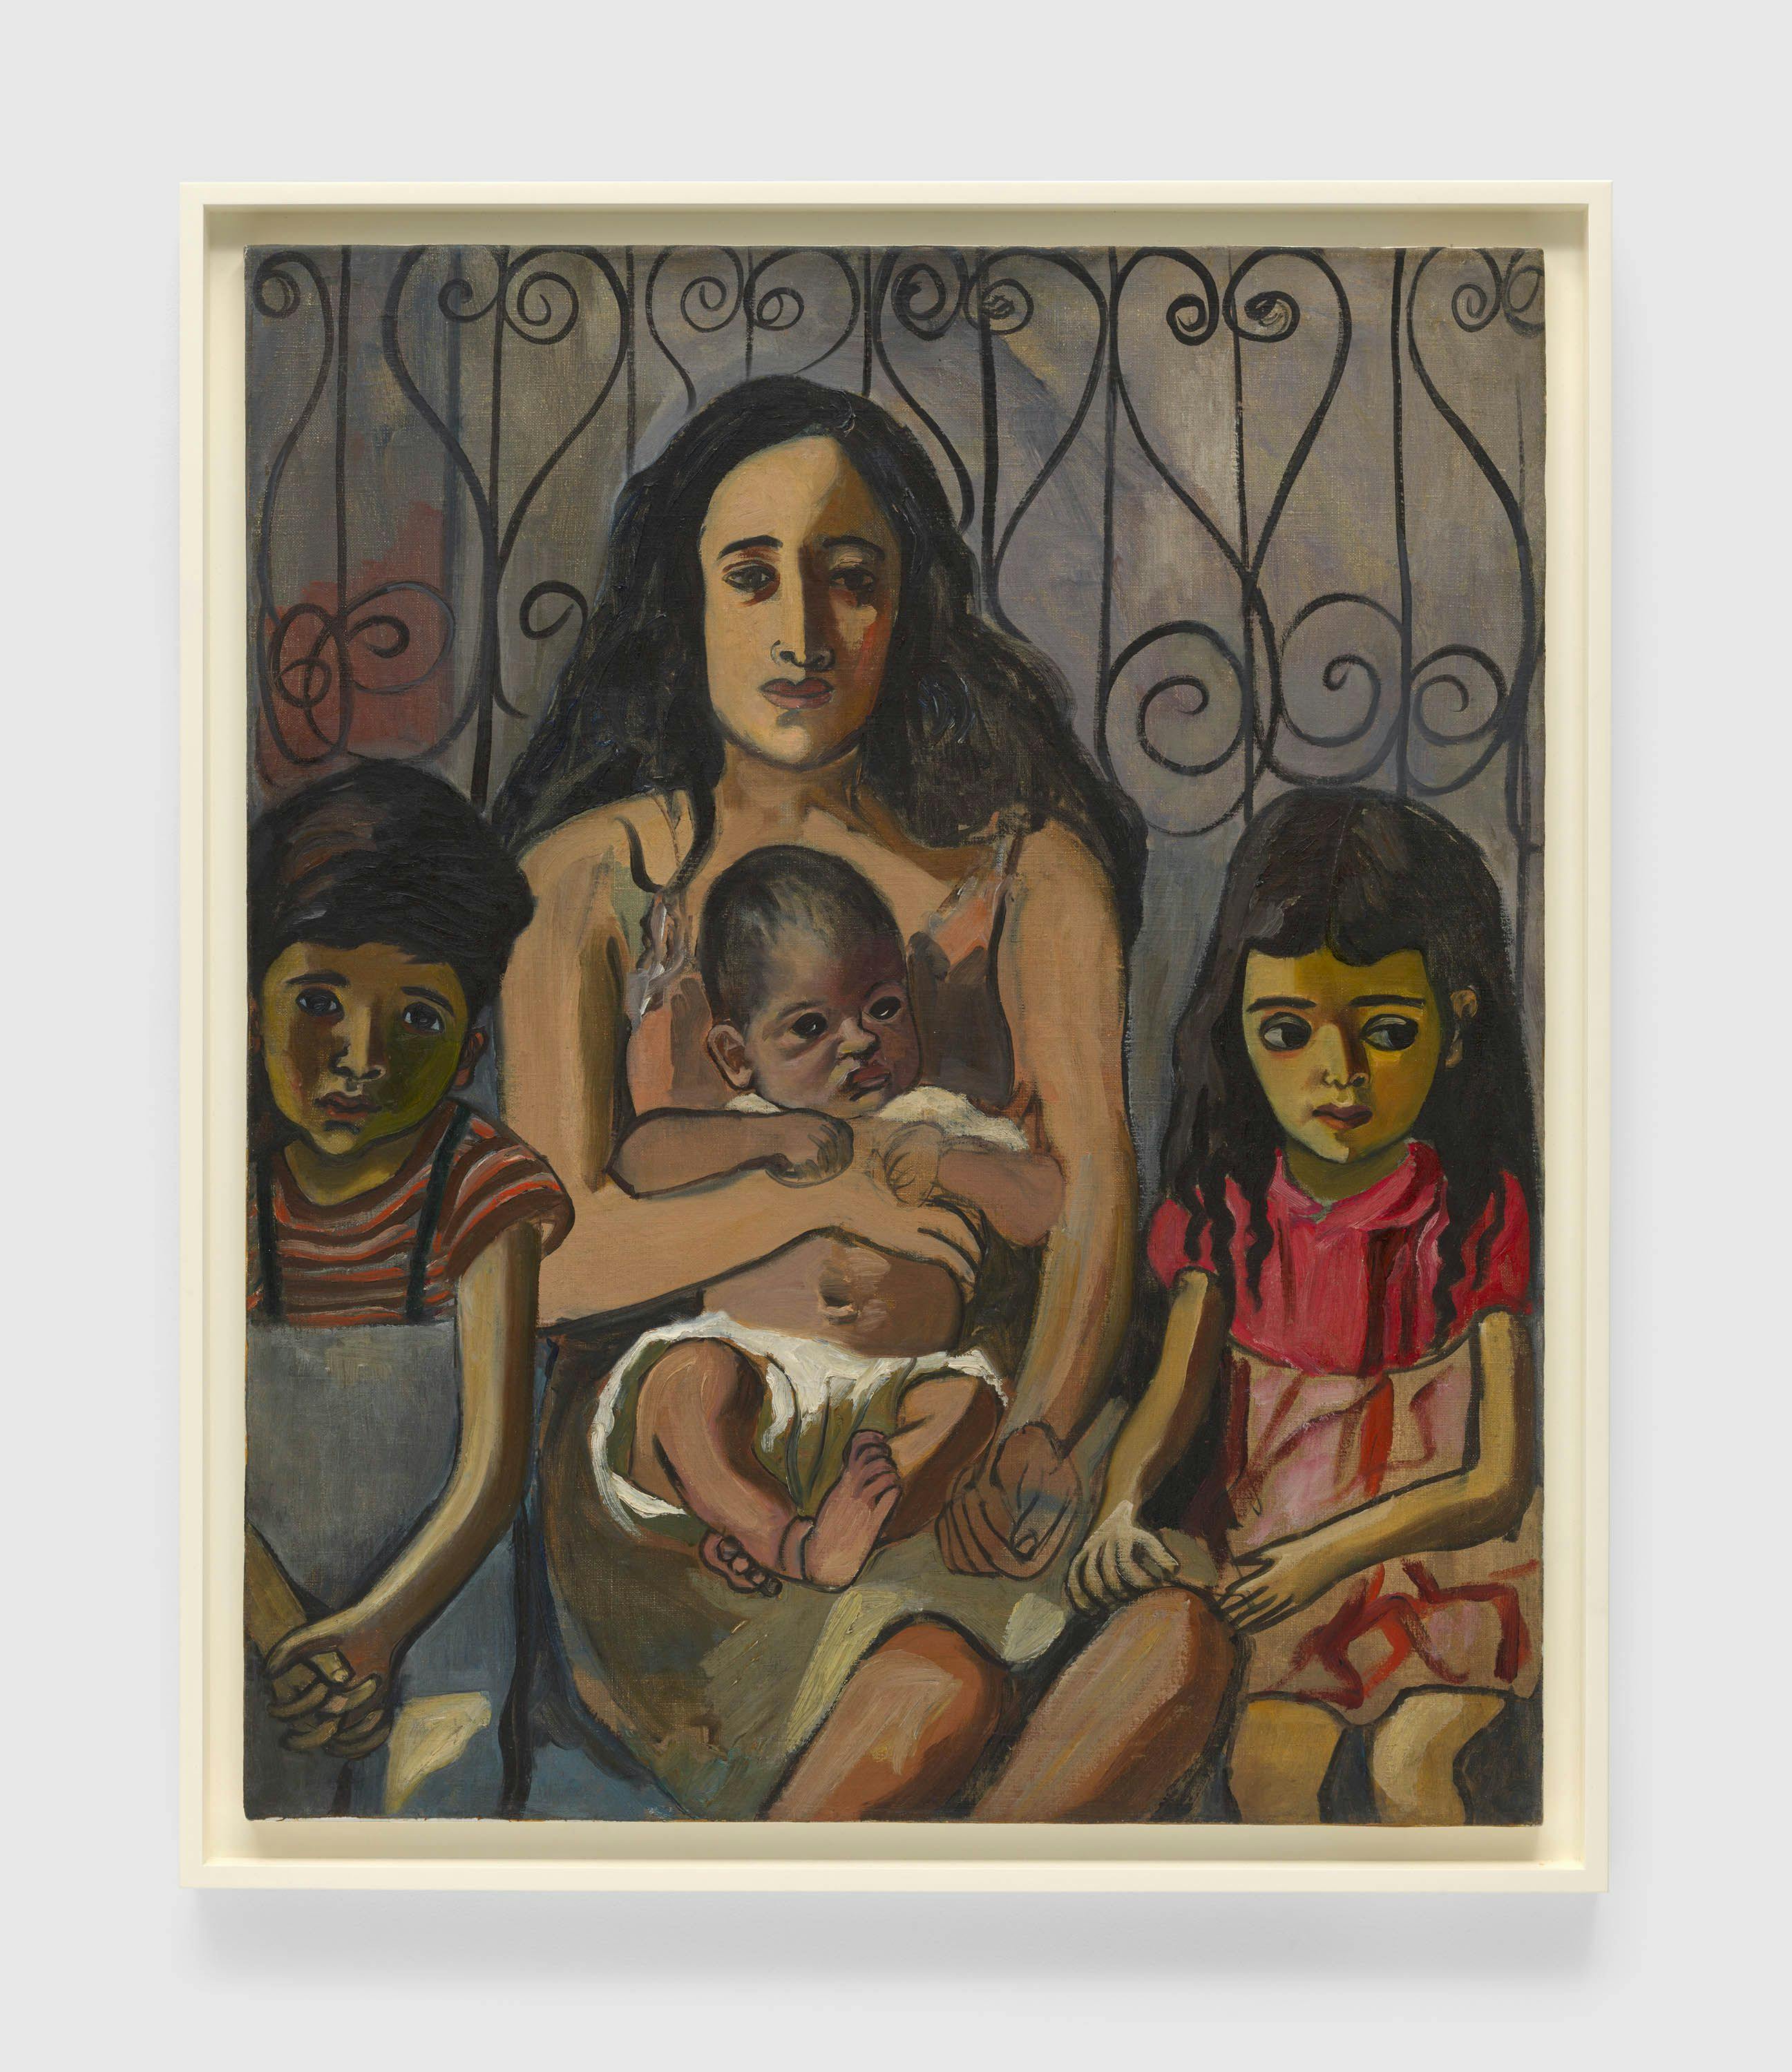 A painting by Alice Neel, titled The Spanish Family, dated 1943.